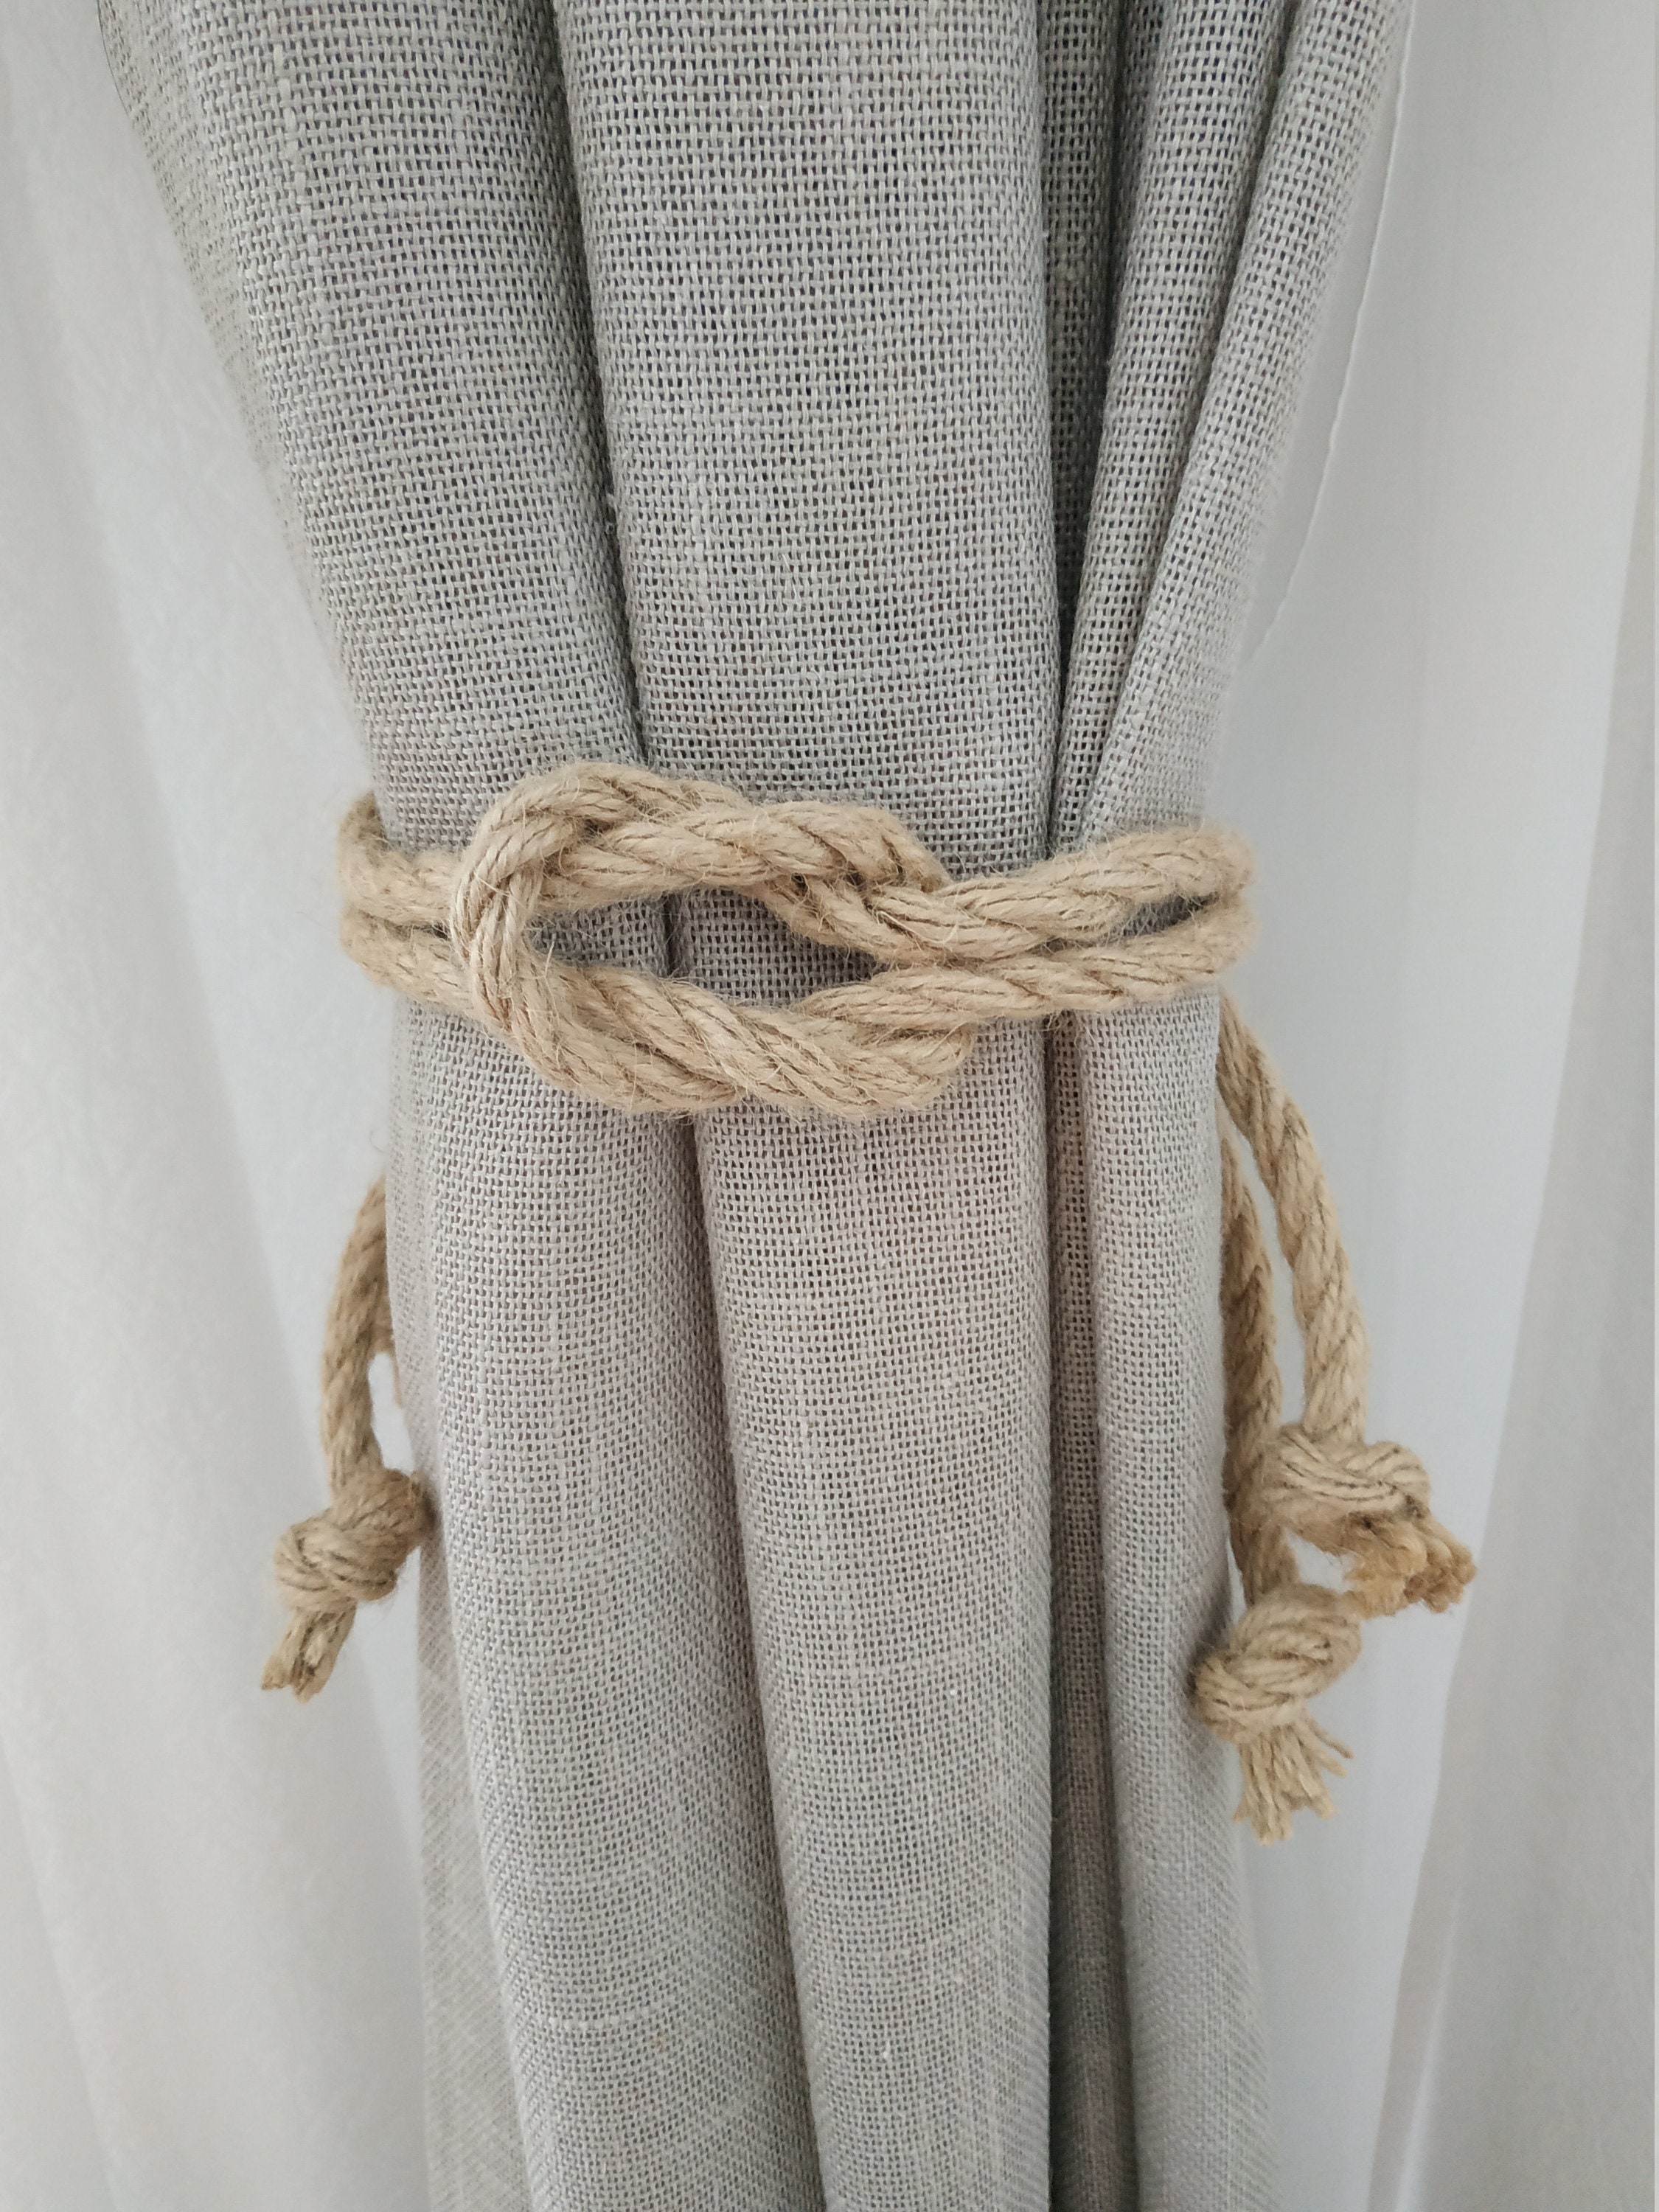 Square Knot Curtain Tie-Back Beach Decor Jute Rope Curtain | Etsy